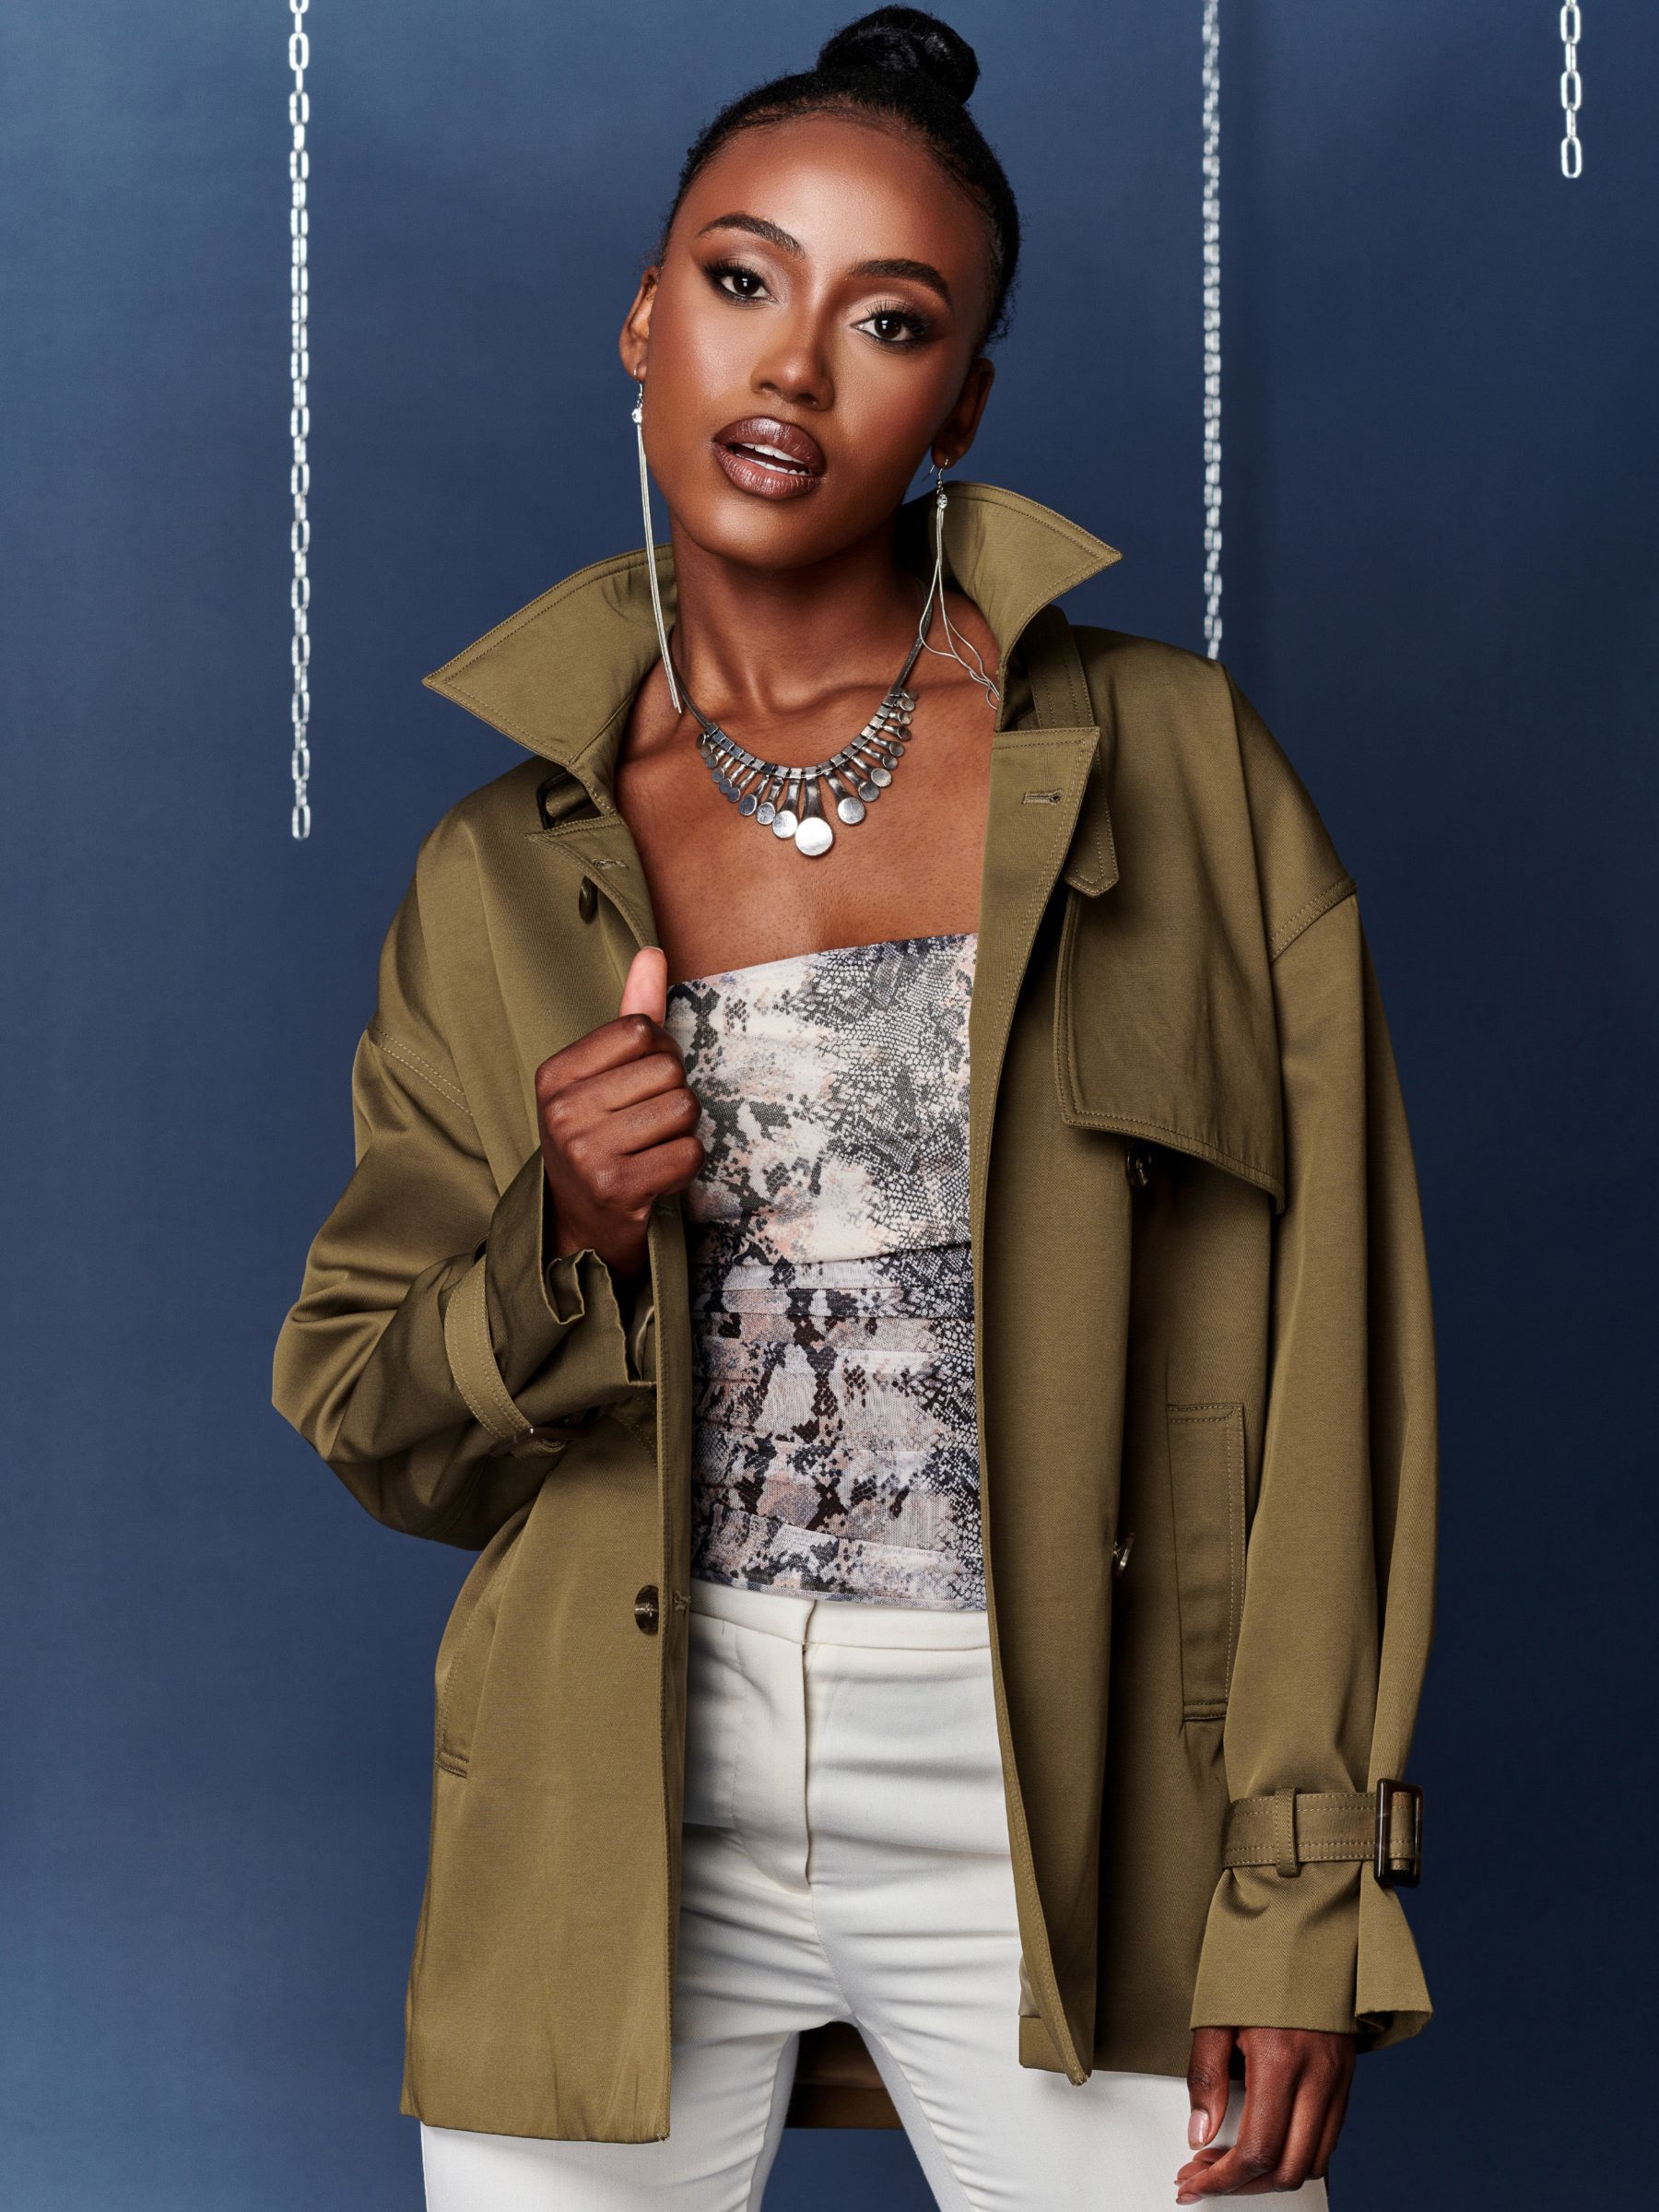 Buy Jolie Moi Short Double Breasted Trench Coat Online at johnlewis.com